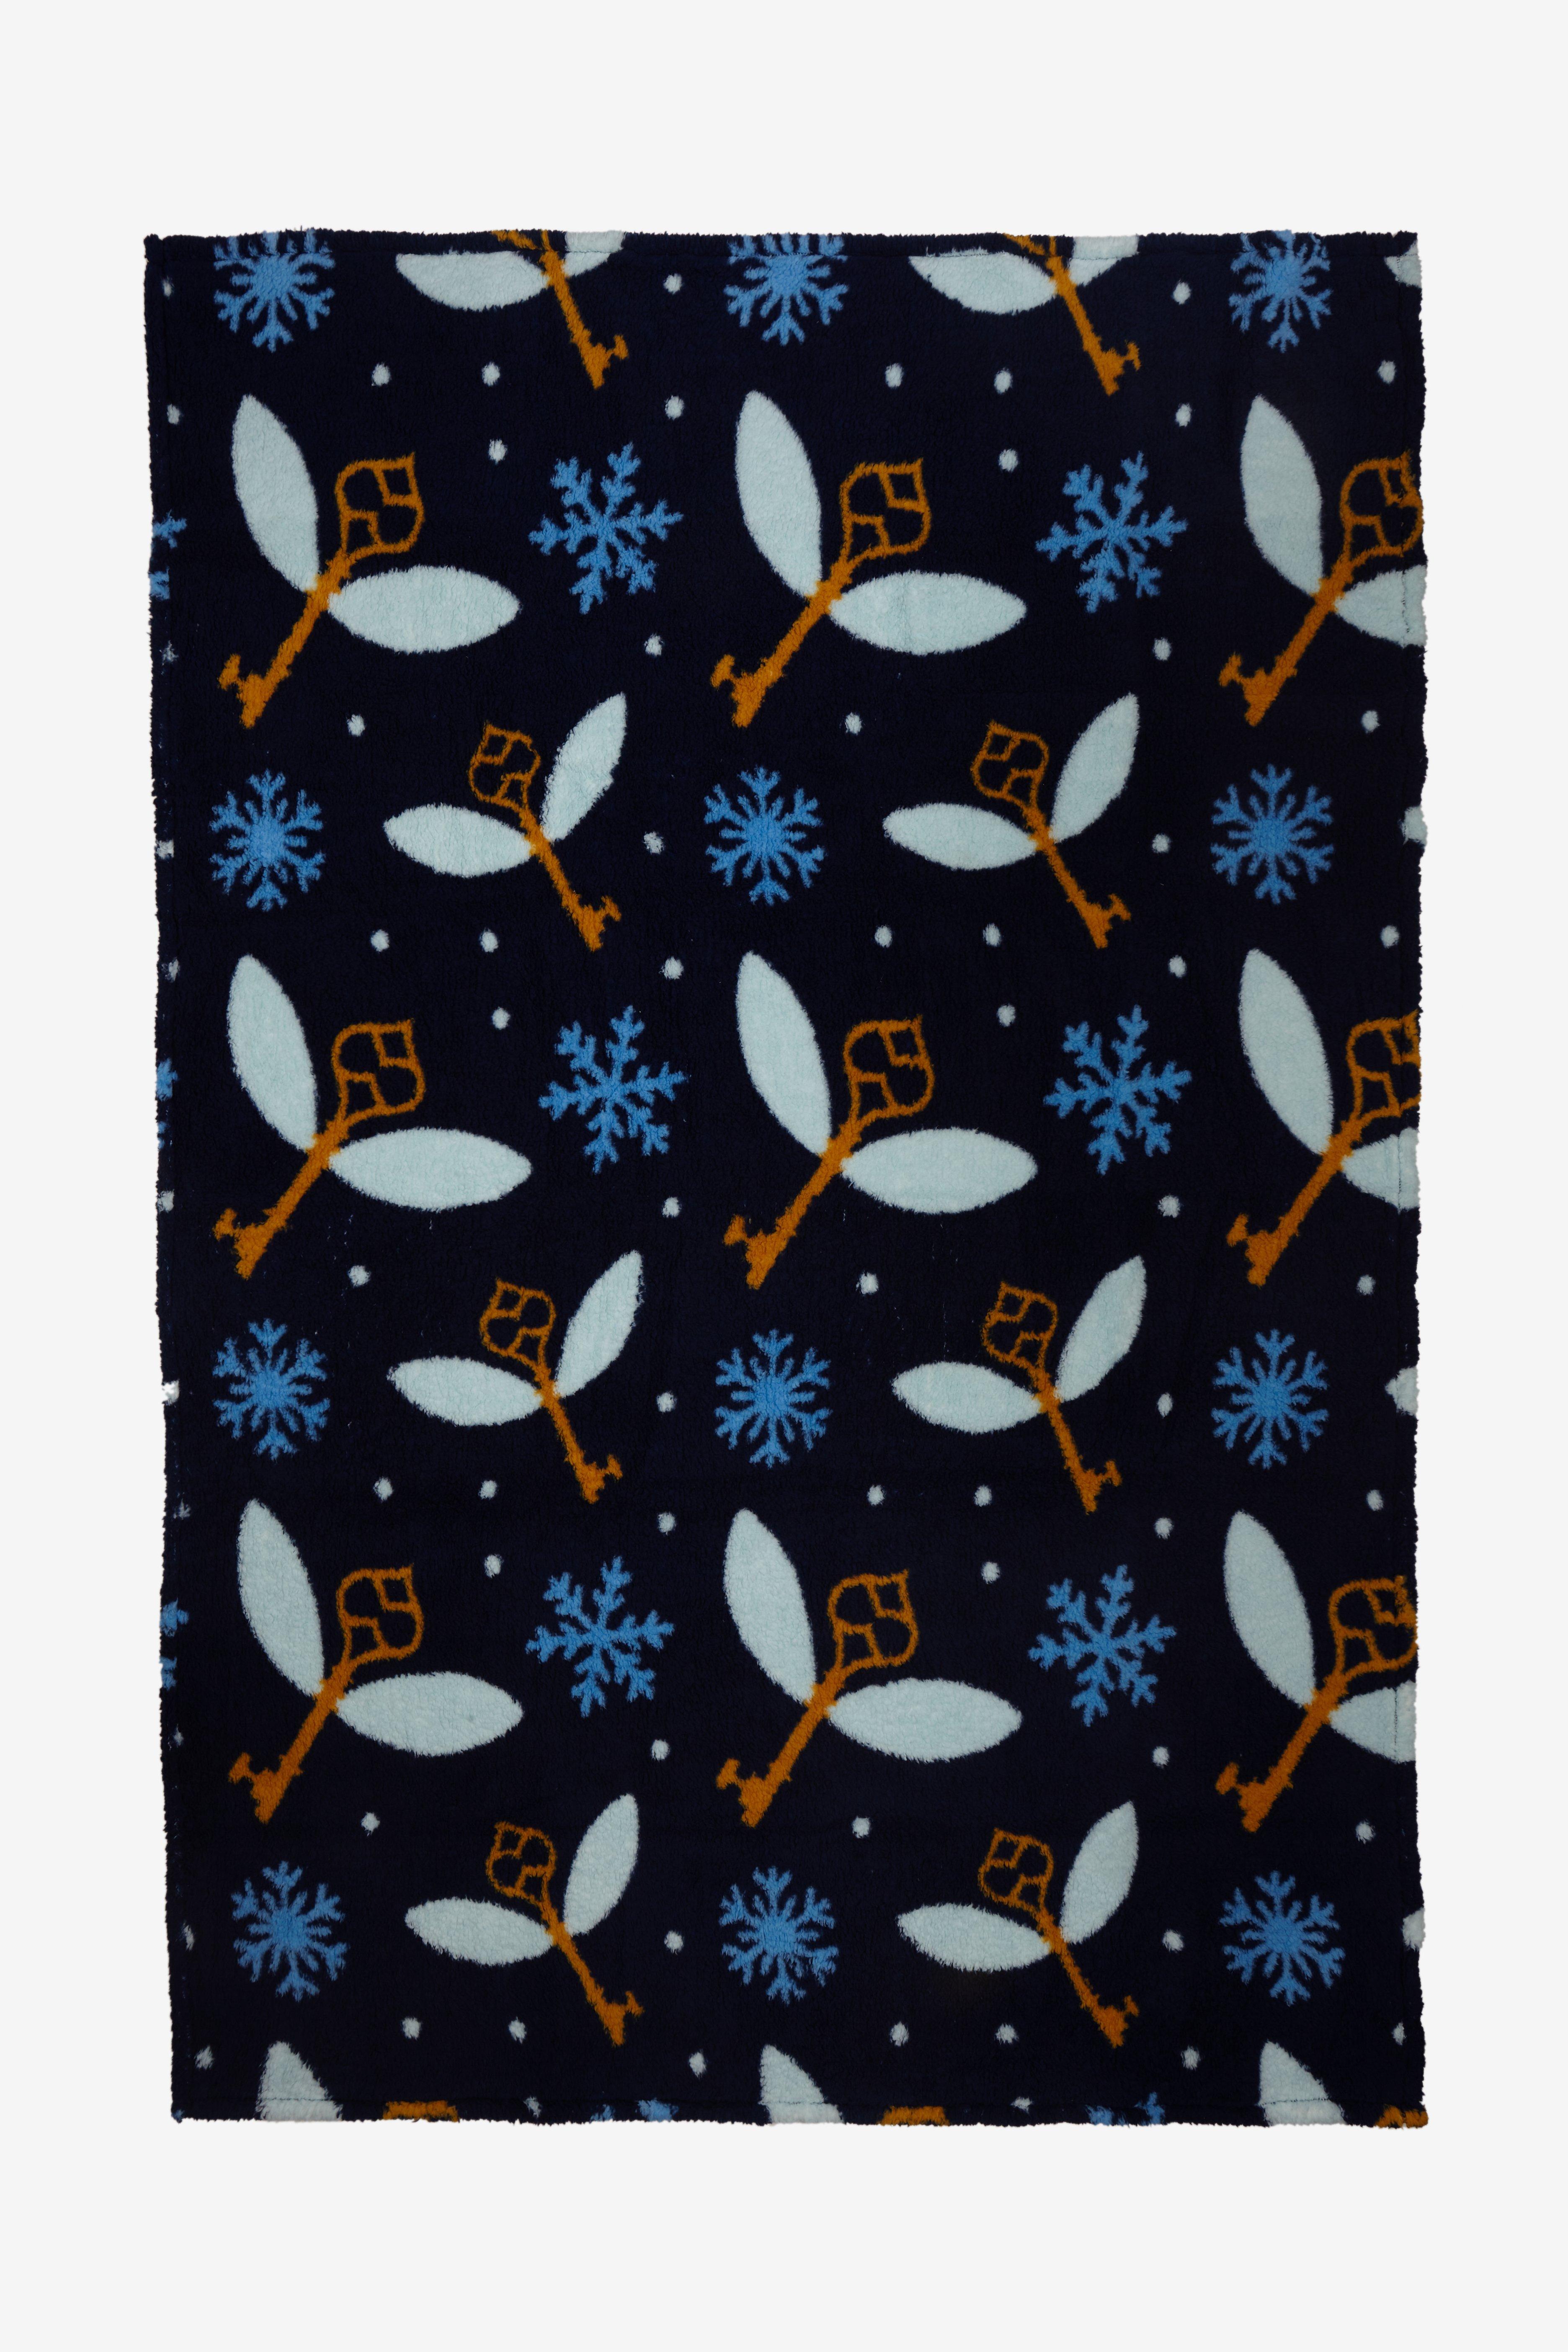 Harry Potter Snowflake House Black Cotton Fabric by the Yard